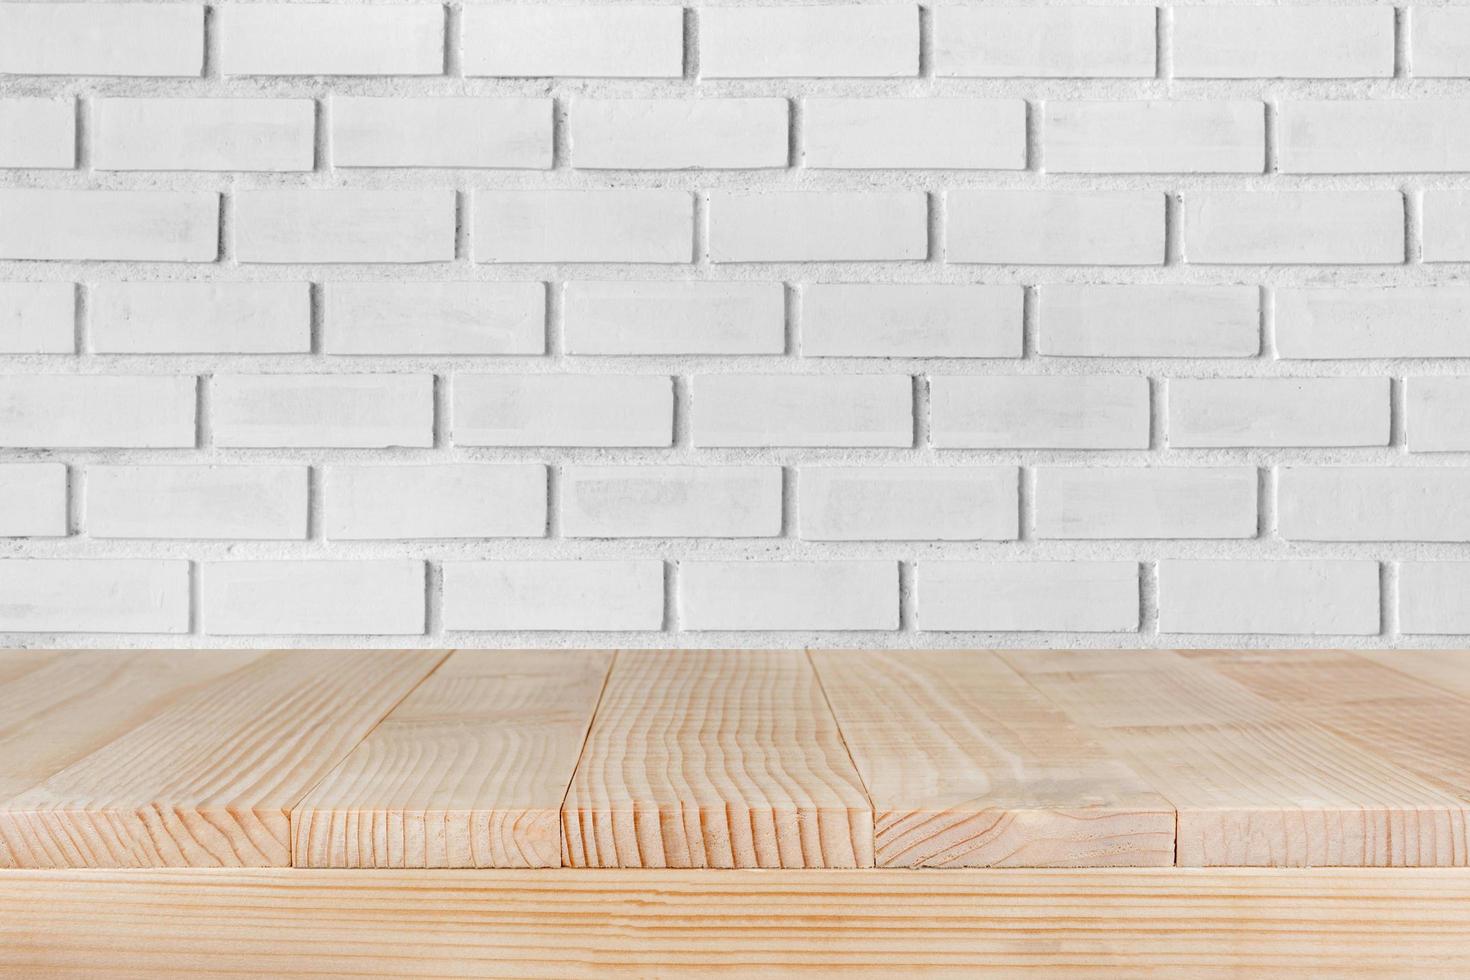 Wood table top on white brick background- can be used for montage or display your products photo